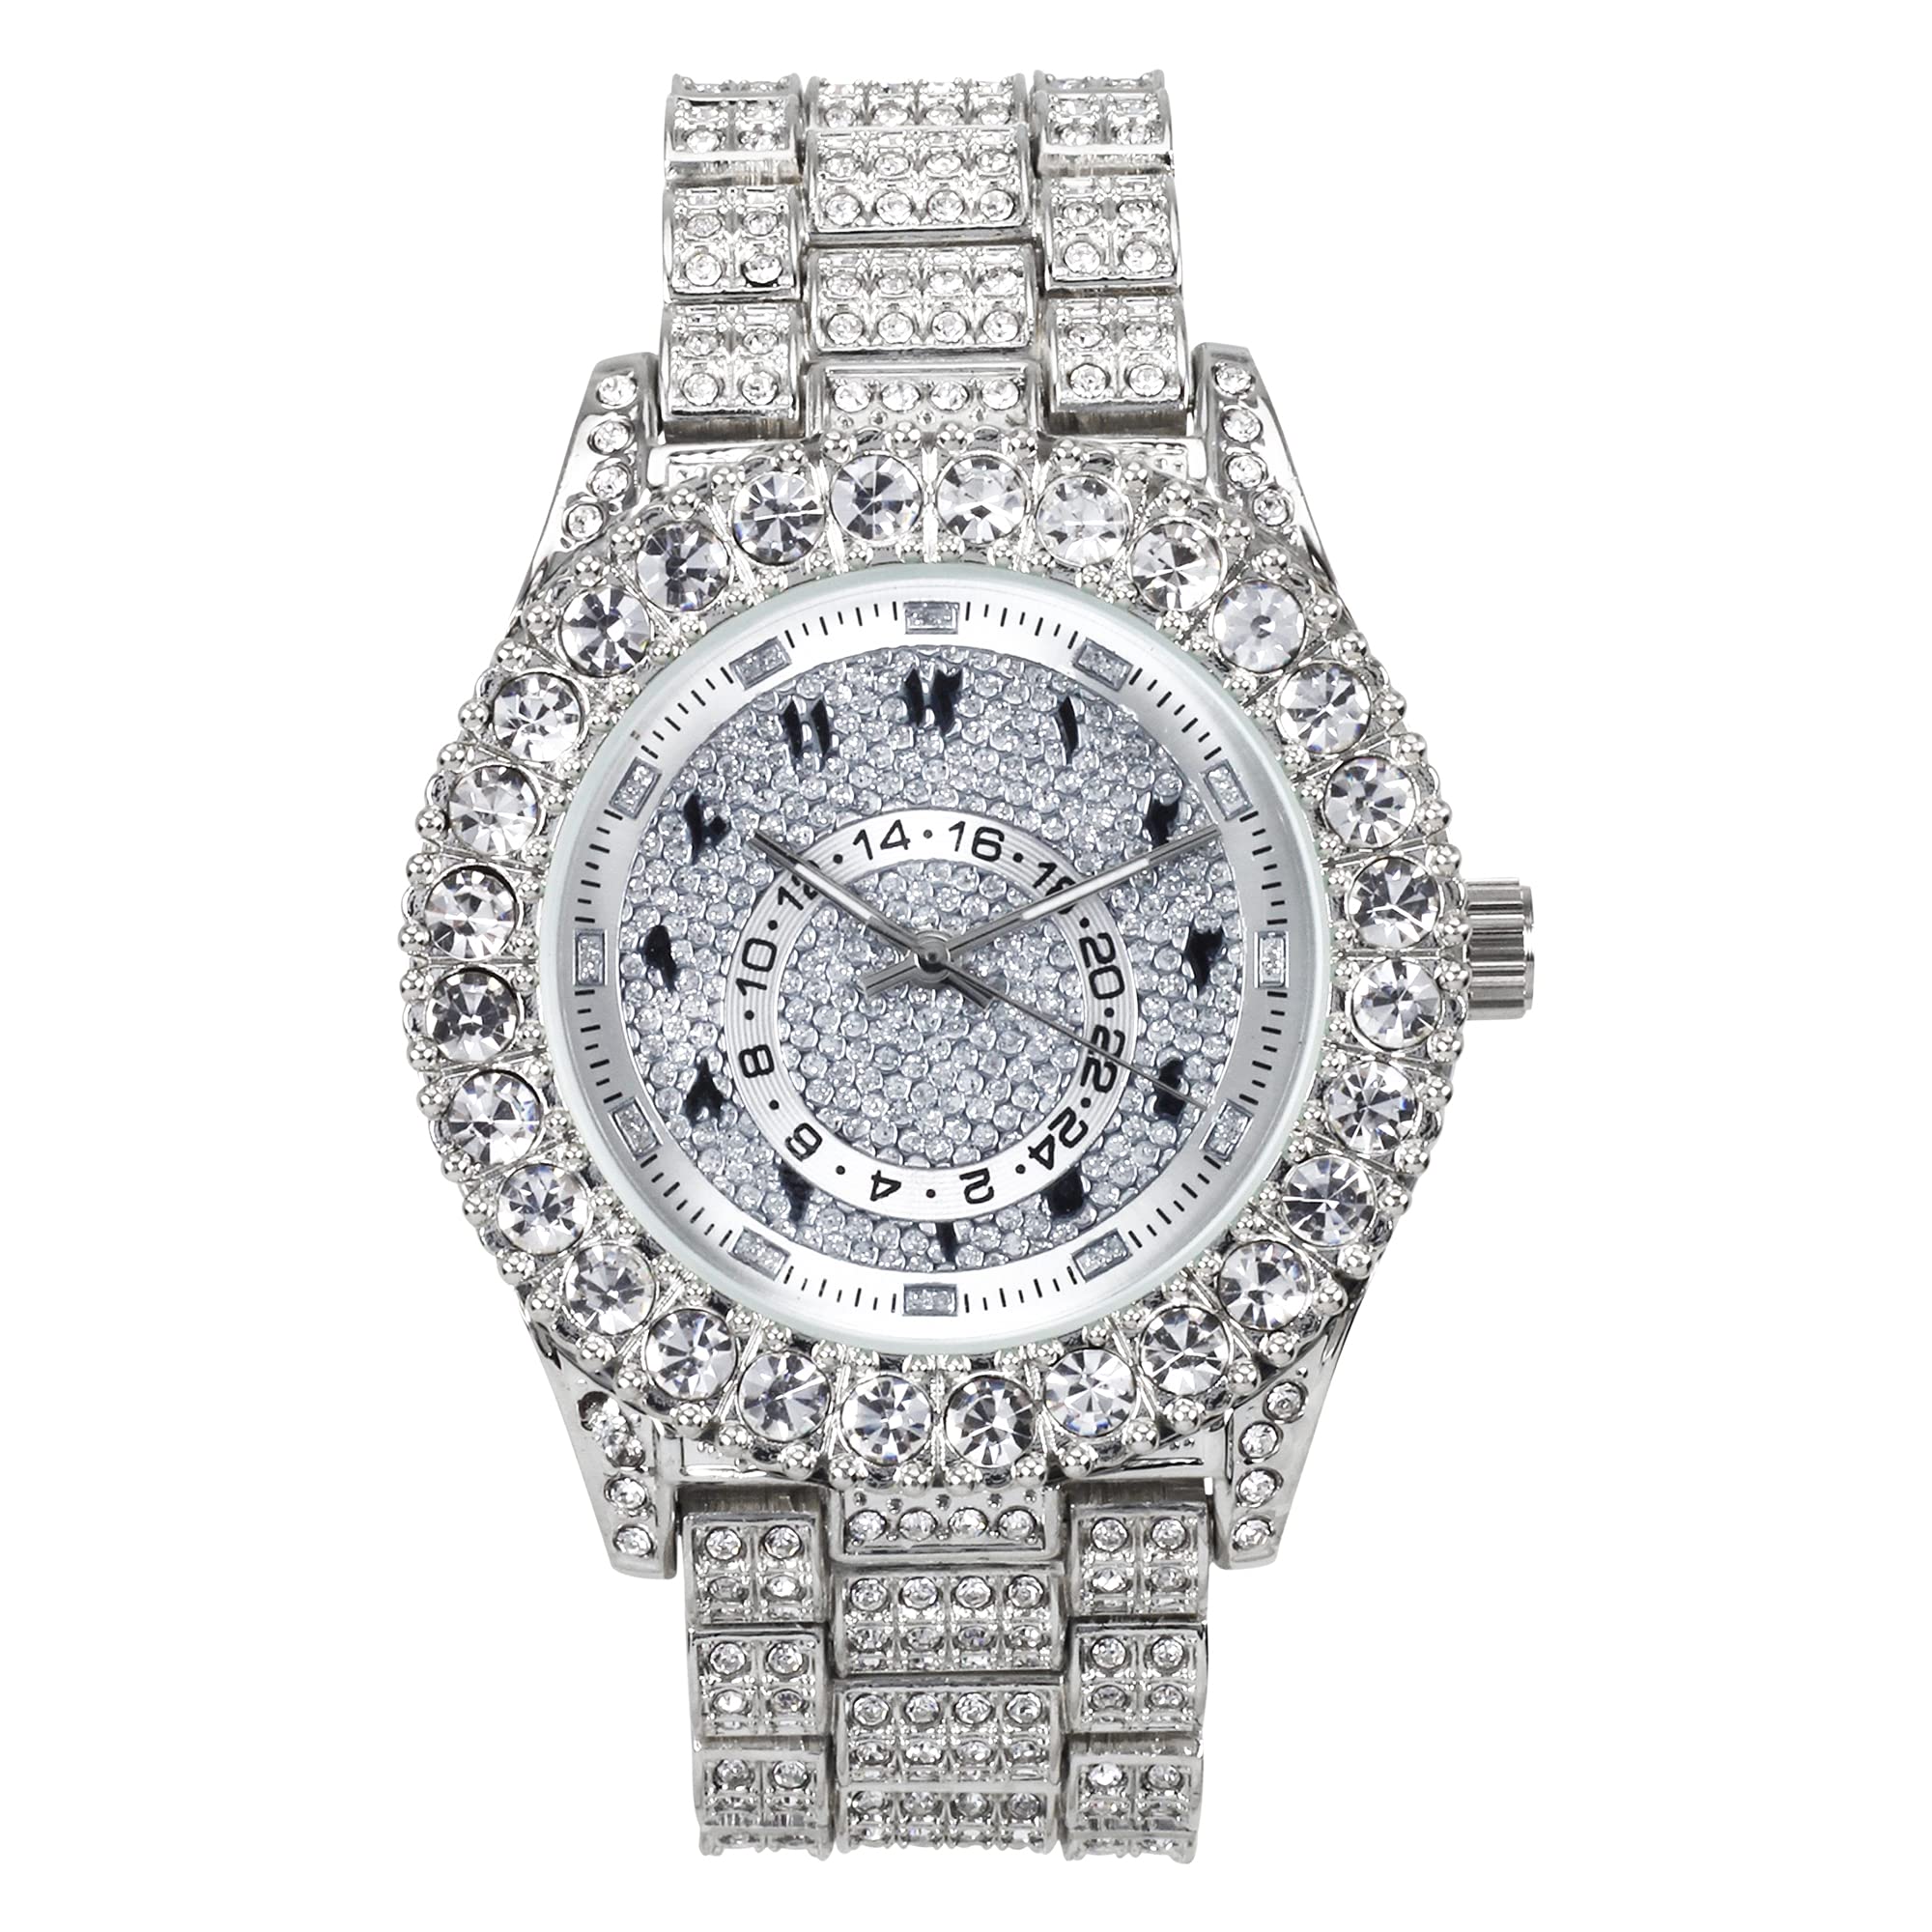 Men's Round Iced Out Watch 44mm Silver - Arab Dial